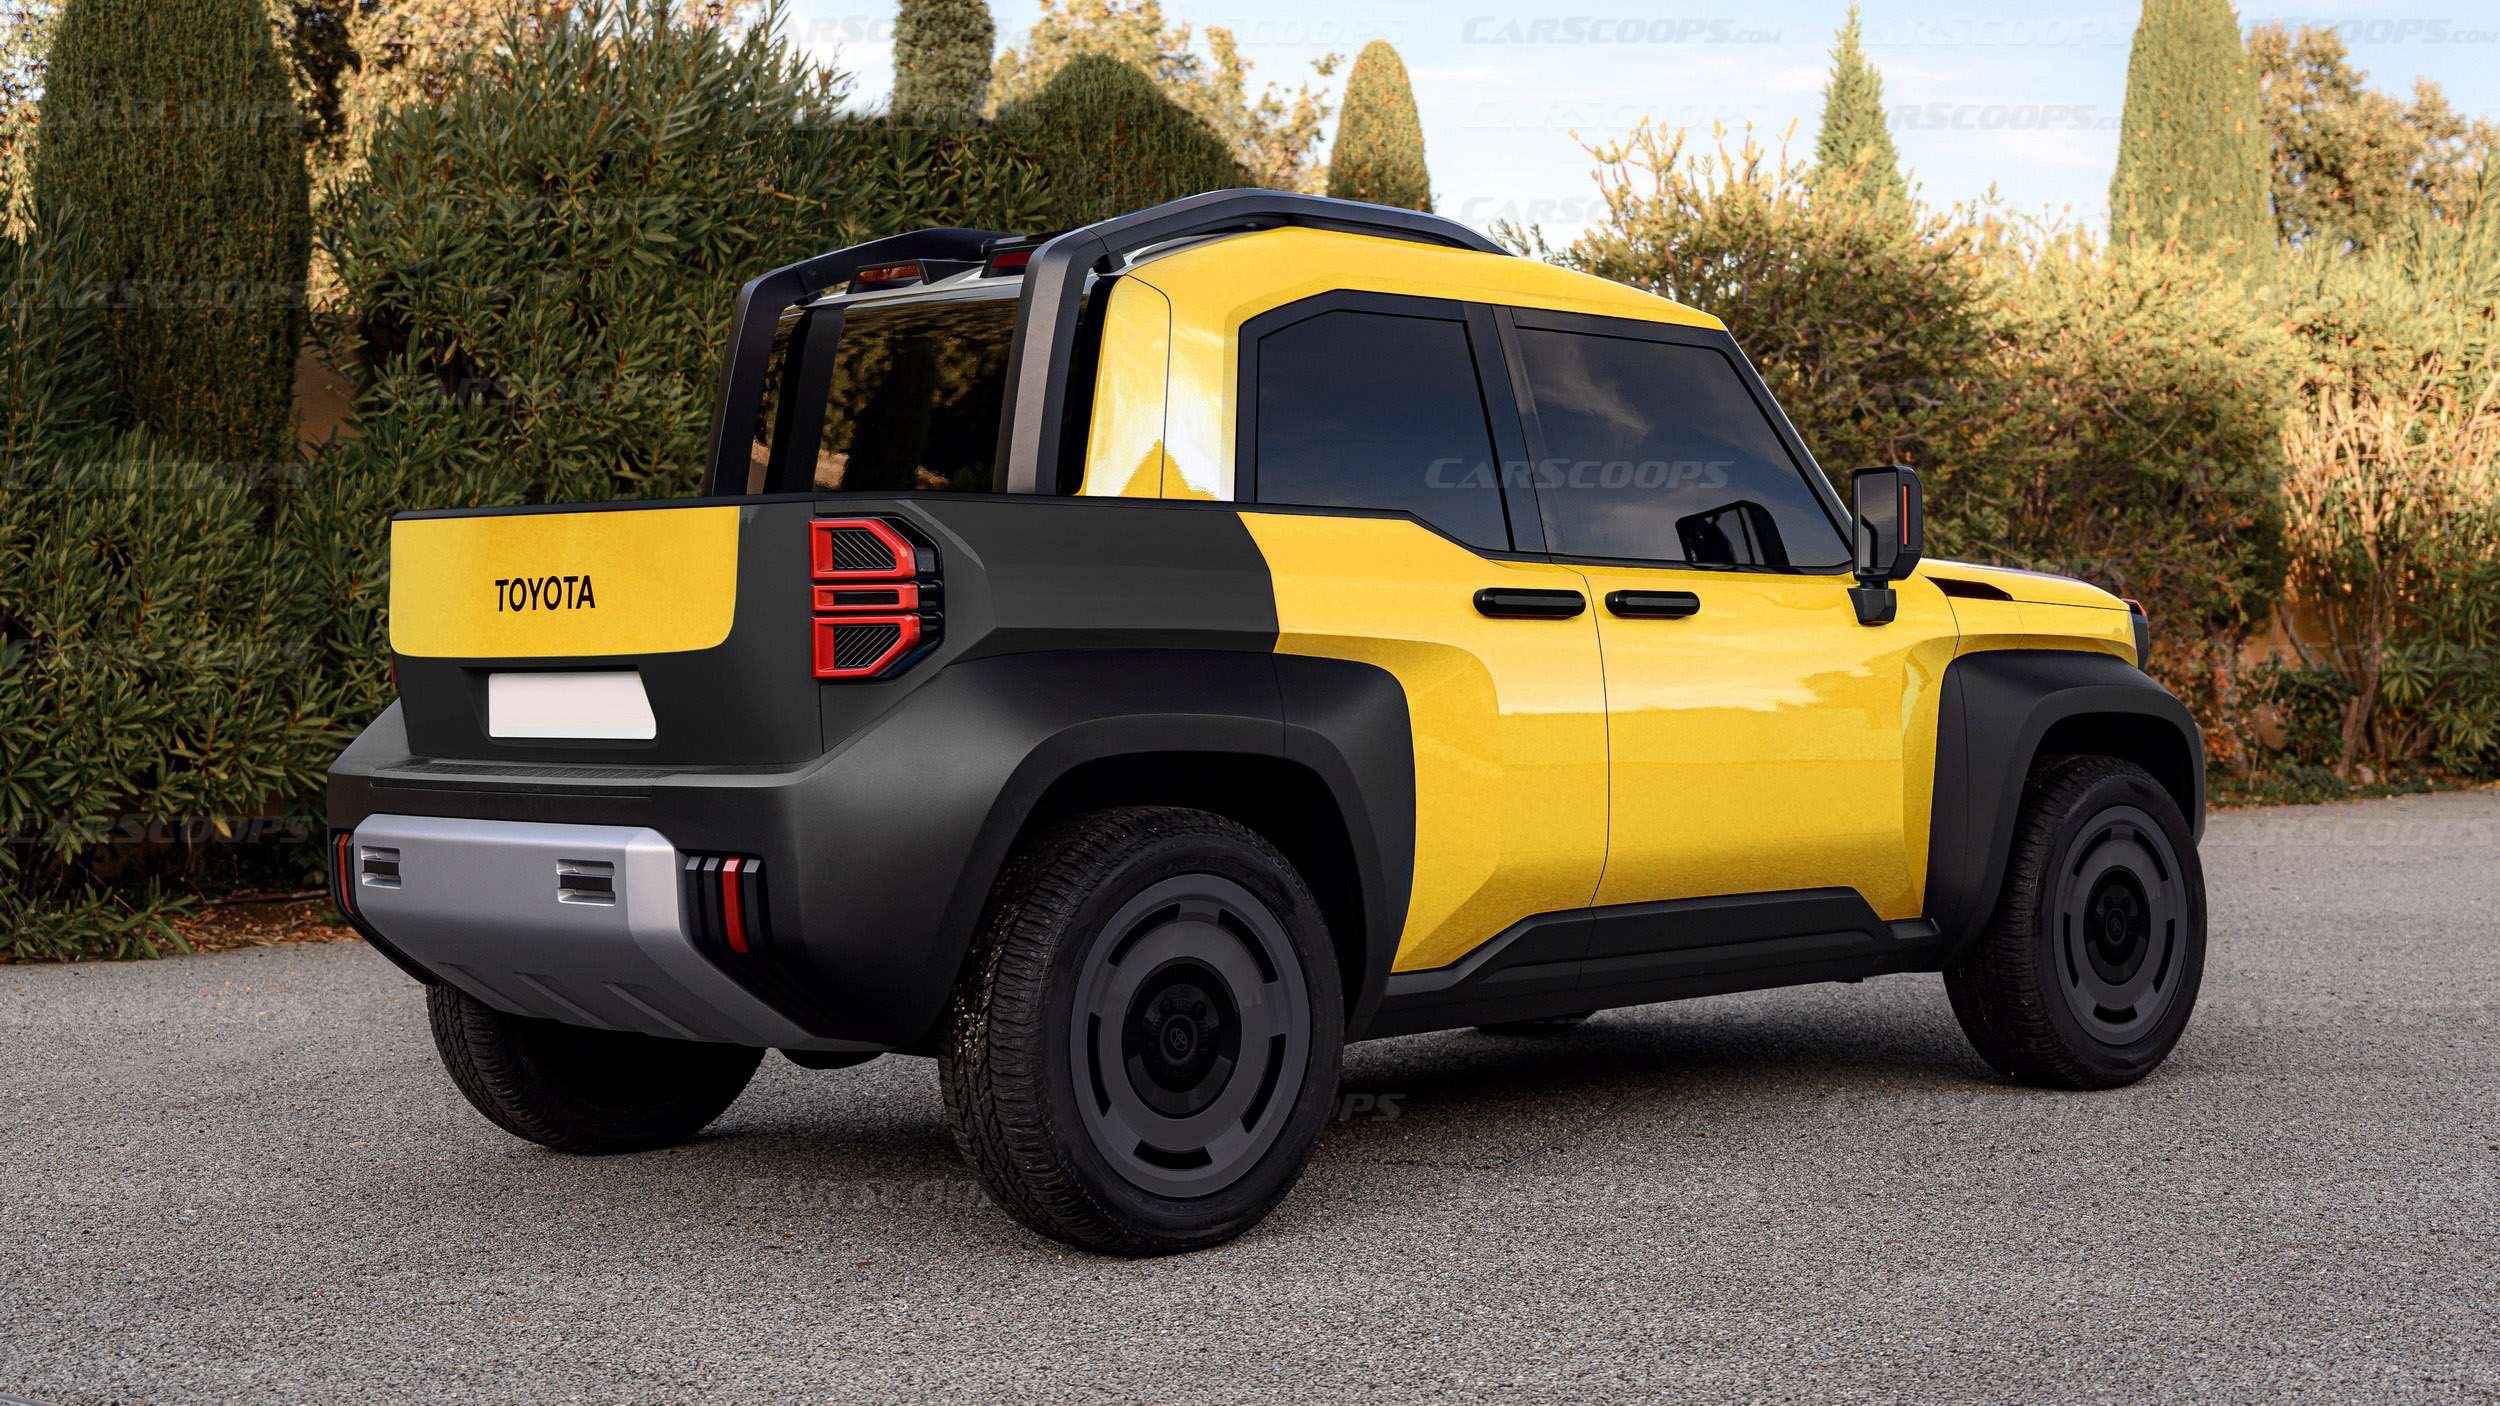 Toyota Compact Cruiser Pickup Rendering Yellow Rear - Auto Recent